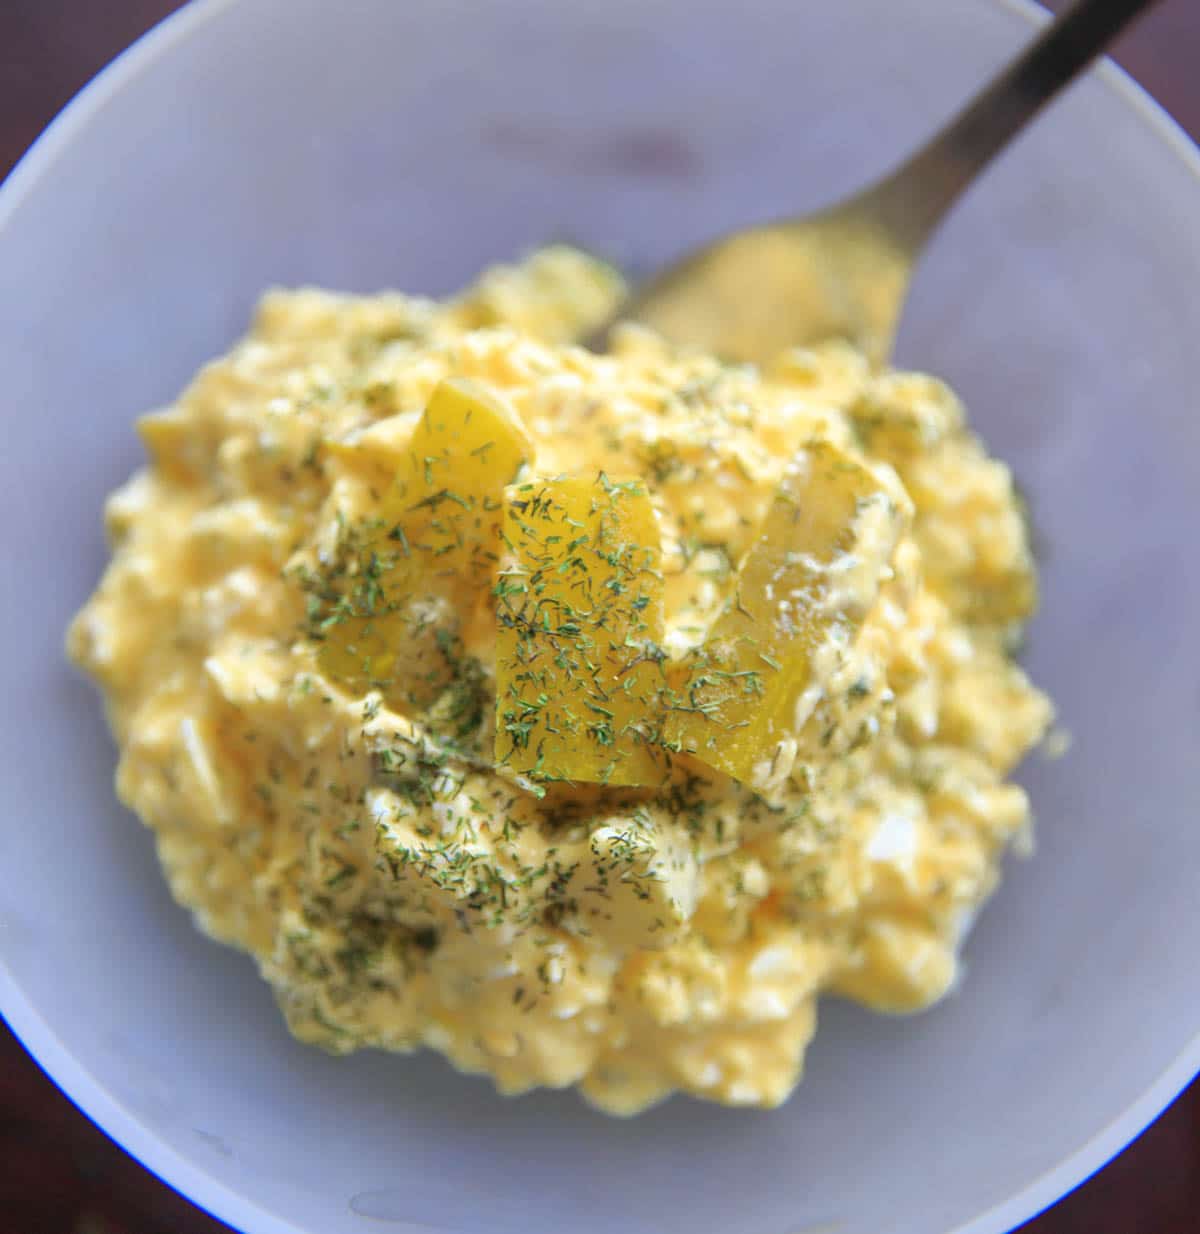 Dill Pickle Egg Salad - serve as a side or eat as a meal! Light on the mayo and big on the crunch! 